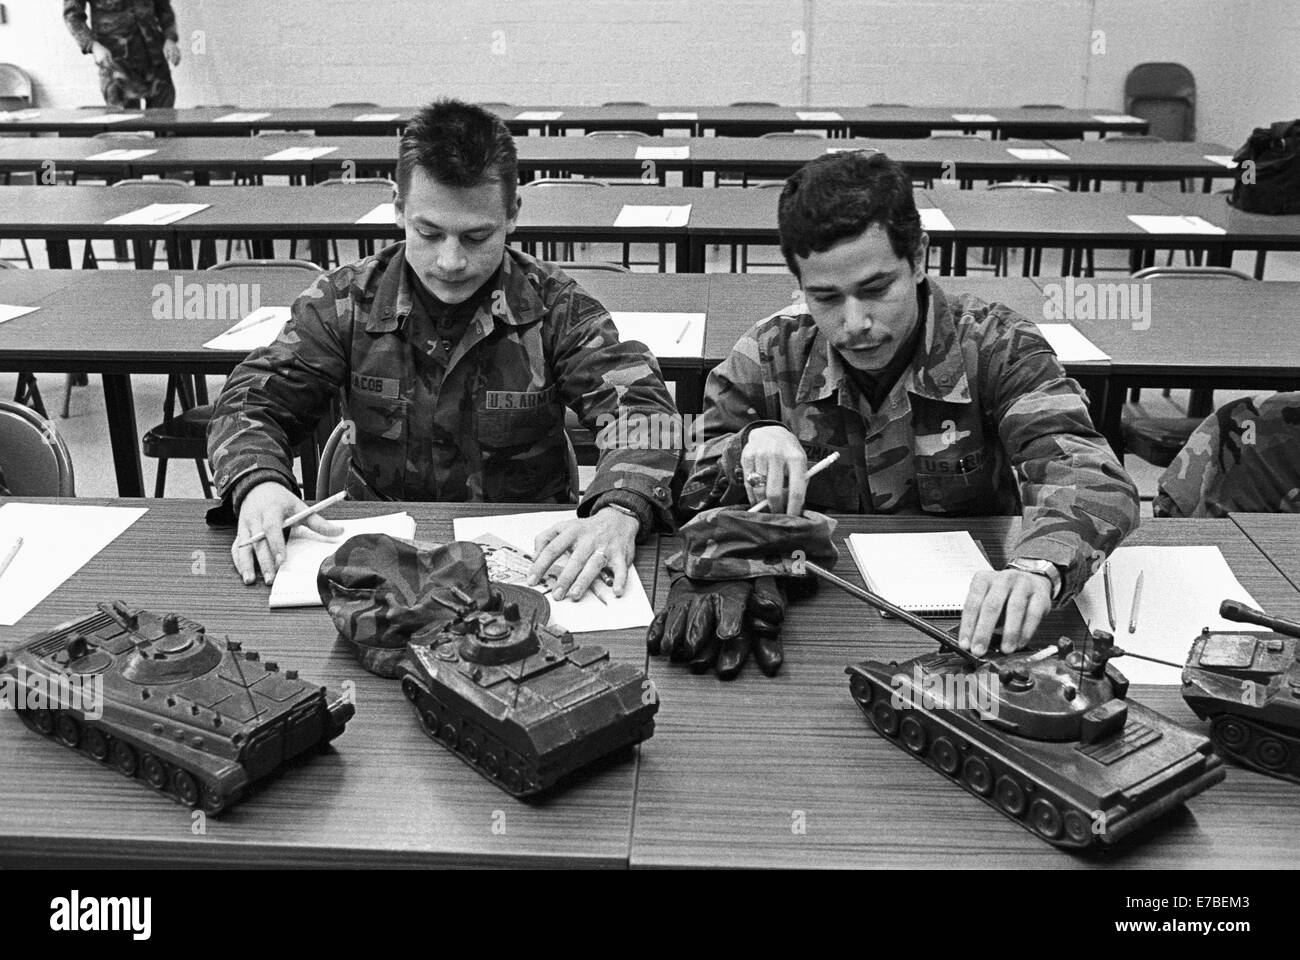 U.S.Army in Germany, Foreign Materials Training Detachment (FMTD) at Grafenwoehr, recognition of Soviet armored vehicles Stock Photo